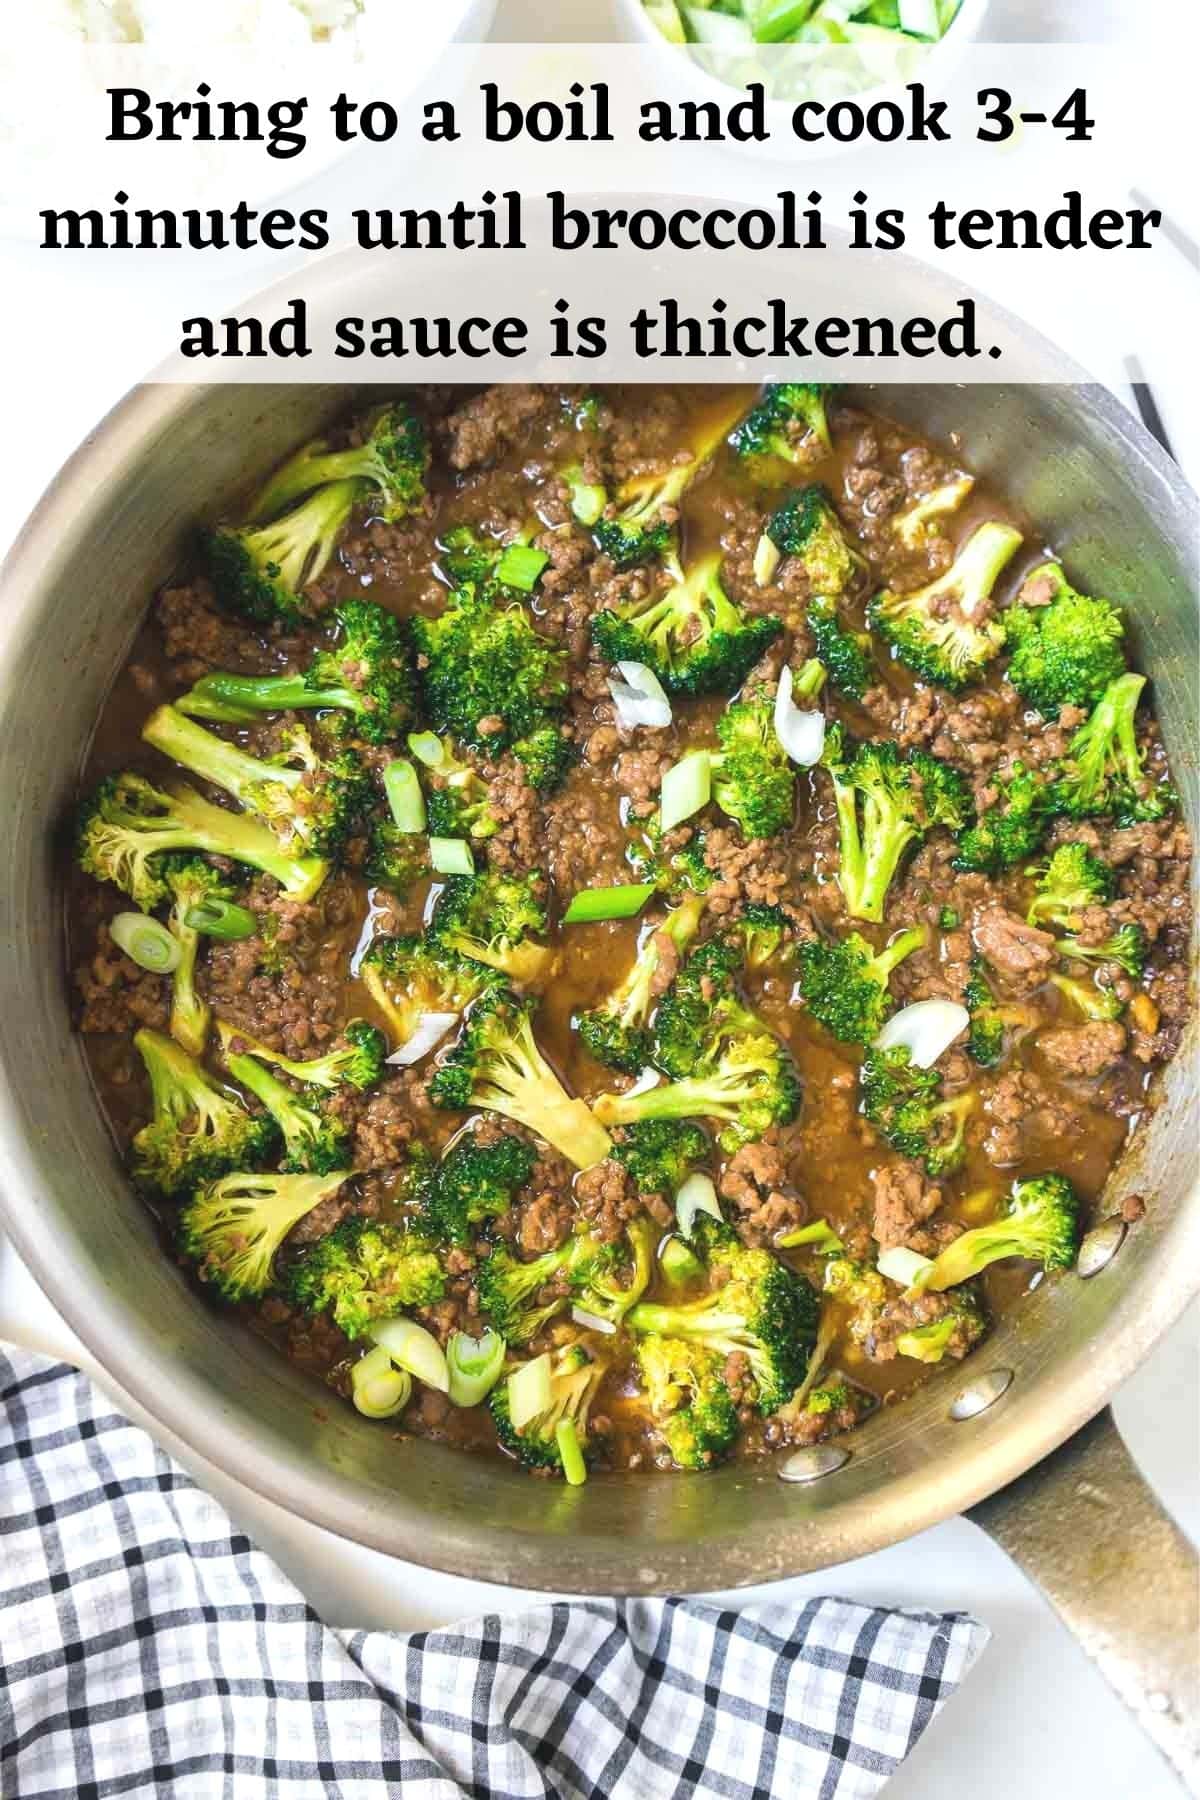 Ground beef and broccoli cooking in a large pan.